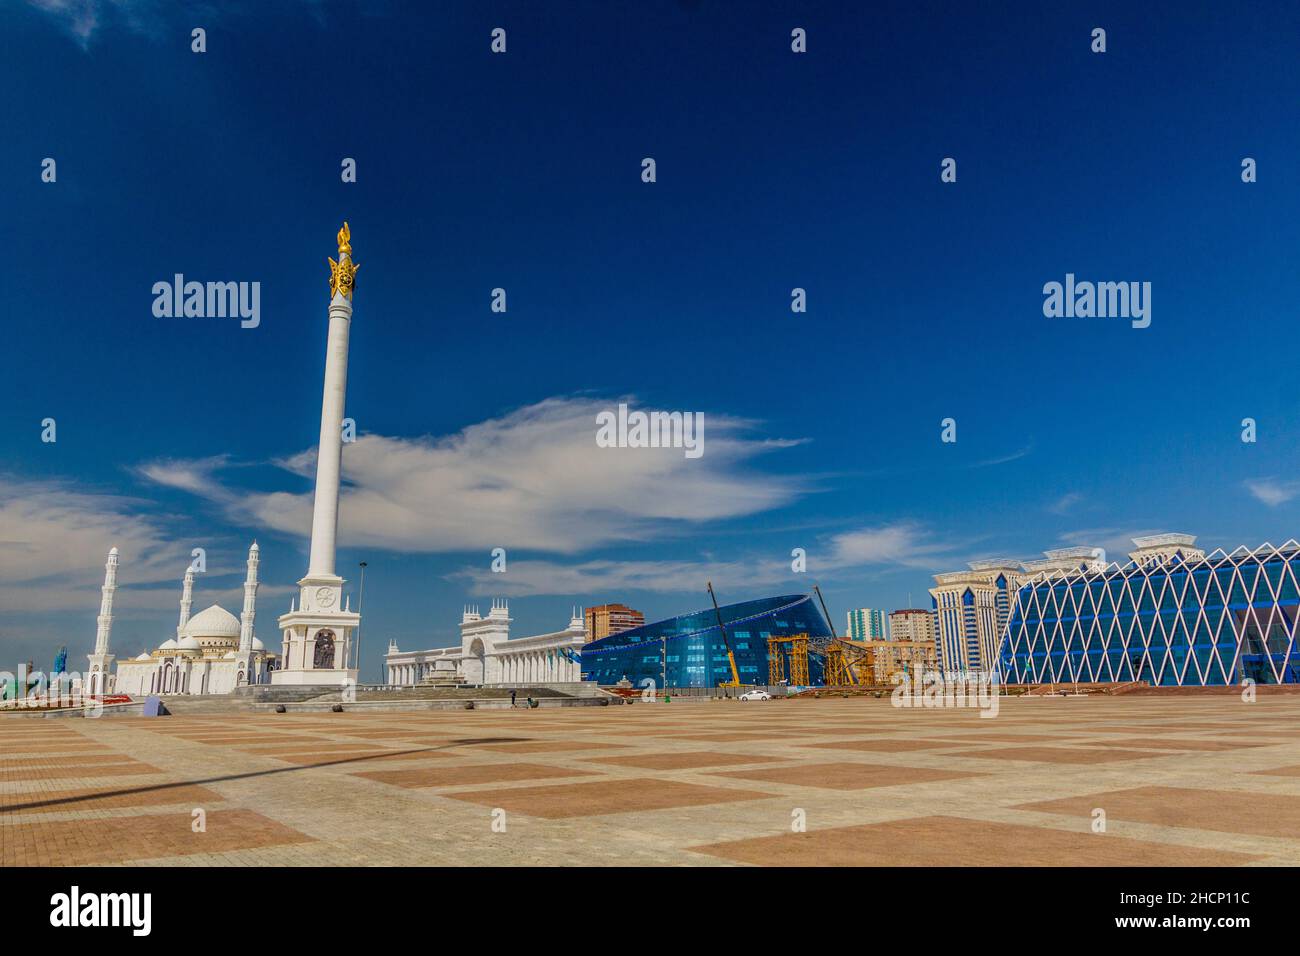 ASTANA, KAZAKHSTAN - JULY 9, 2018: View of the Independence Square in Astana now Nur-Sultan , capital of Kazakhstan. Stock Photo